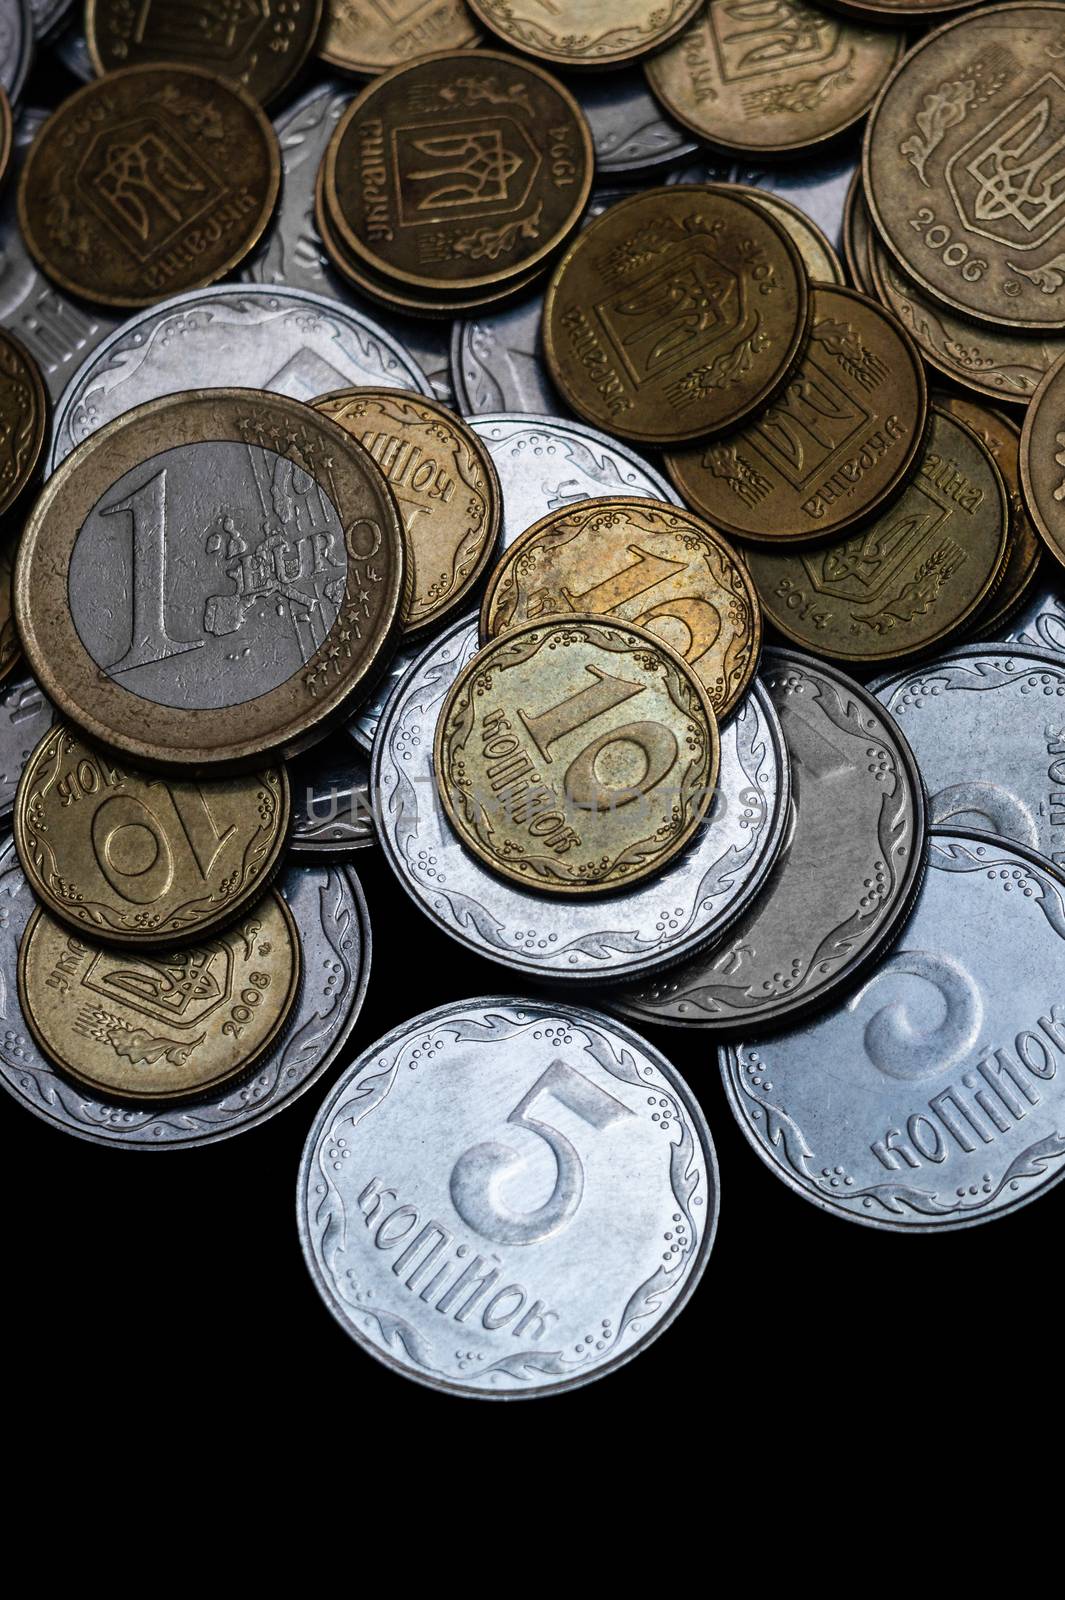 Ukrainian coins with one euro coin isolated on black background. Close-up view. Coins are located at the upper side of frame. A conceptual image.